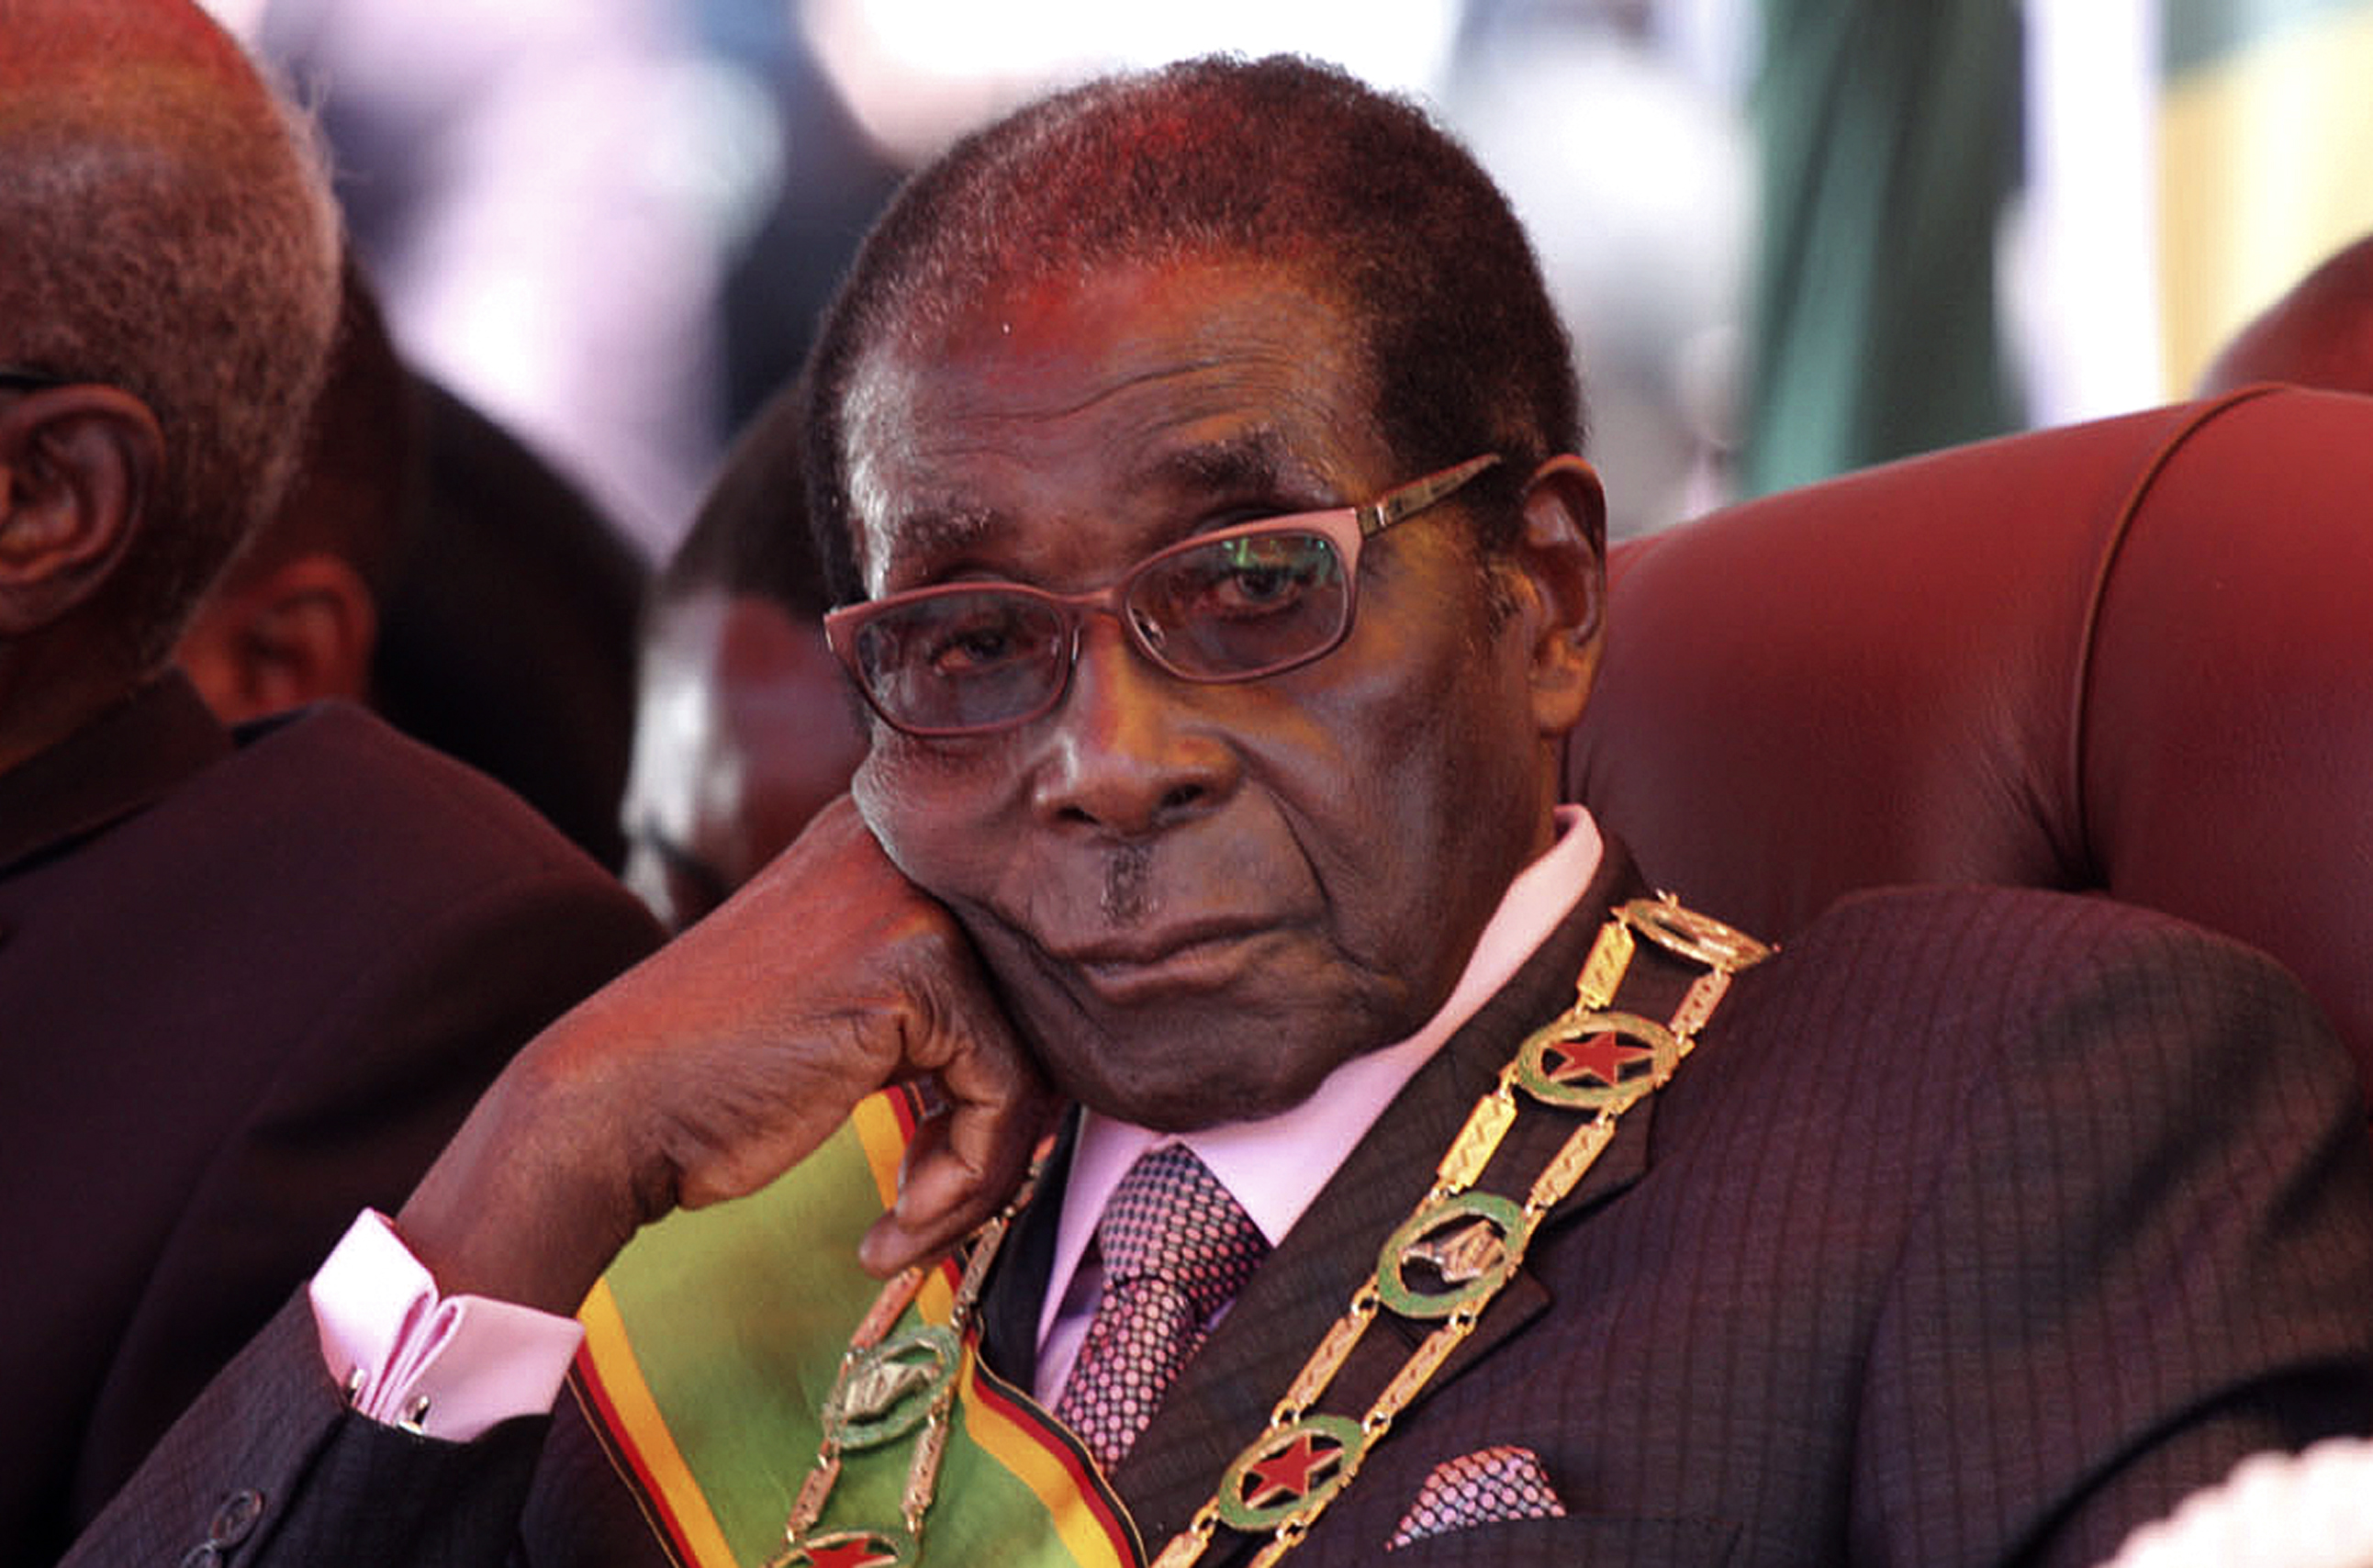 Mugabe turns down military offer for him to resign peacefully